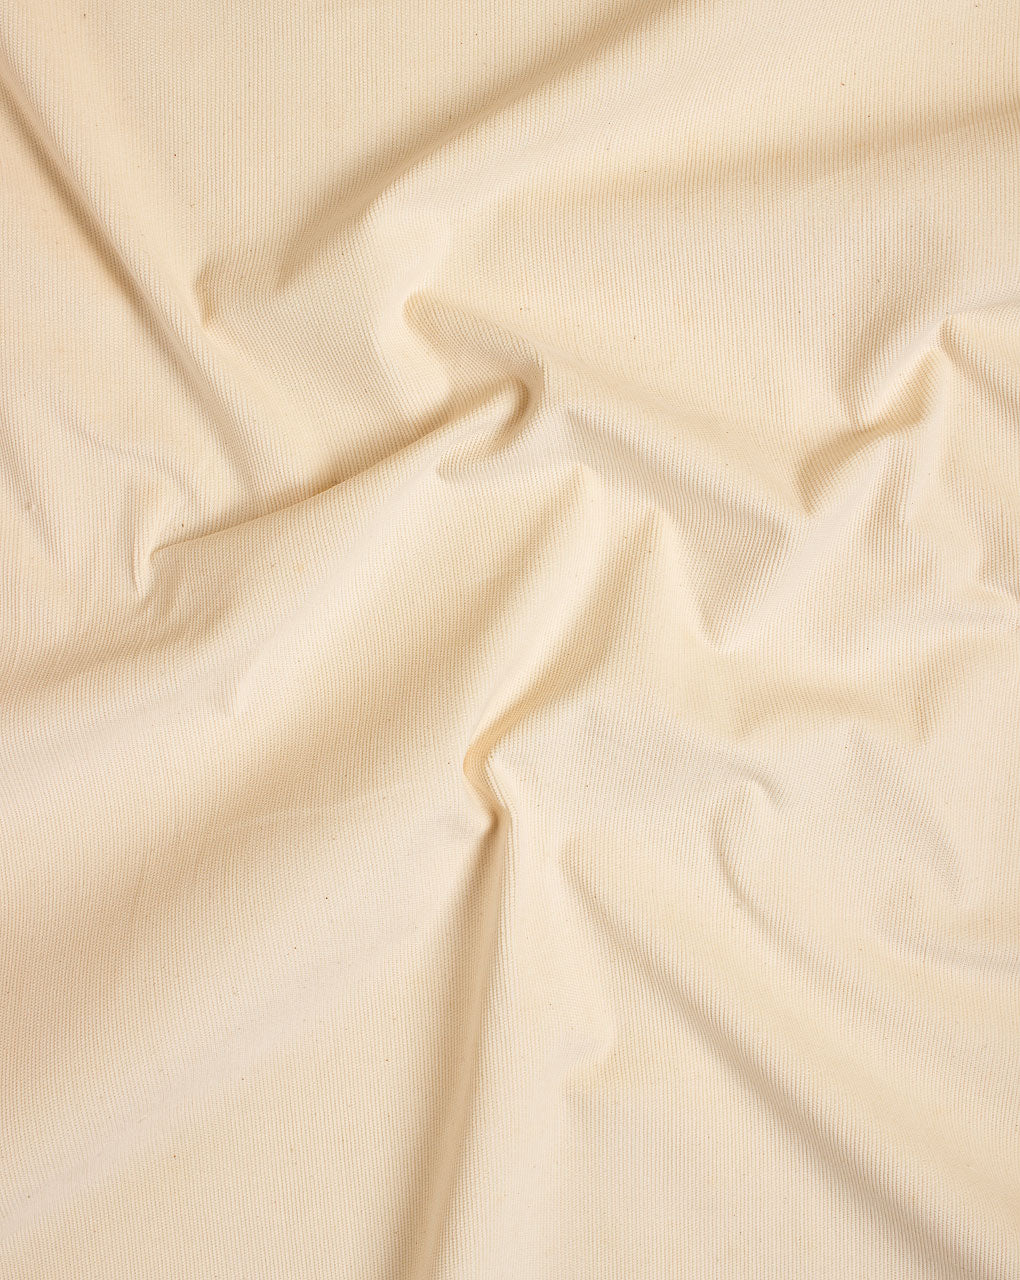 Greige Stretch Suiting Cotton Lycra Corduroy Fabric ( 26 Wales | Width 65 Inch ) - Fabriclore.com